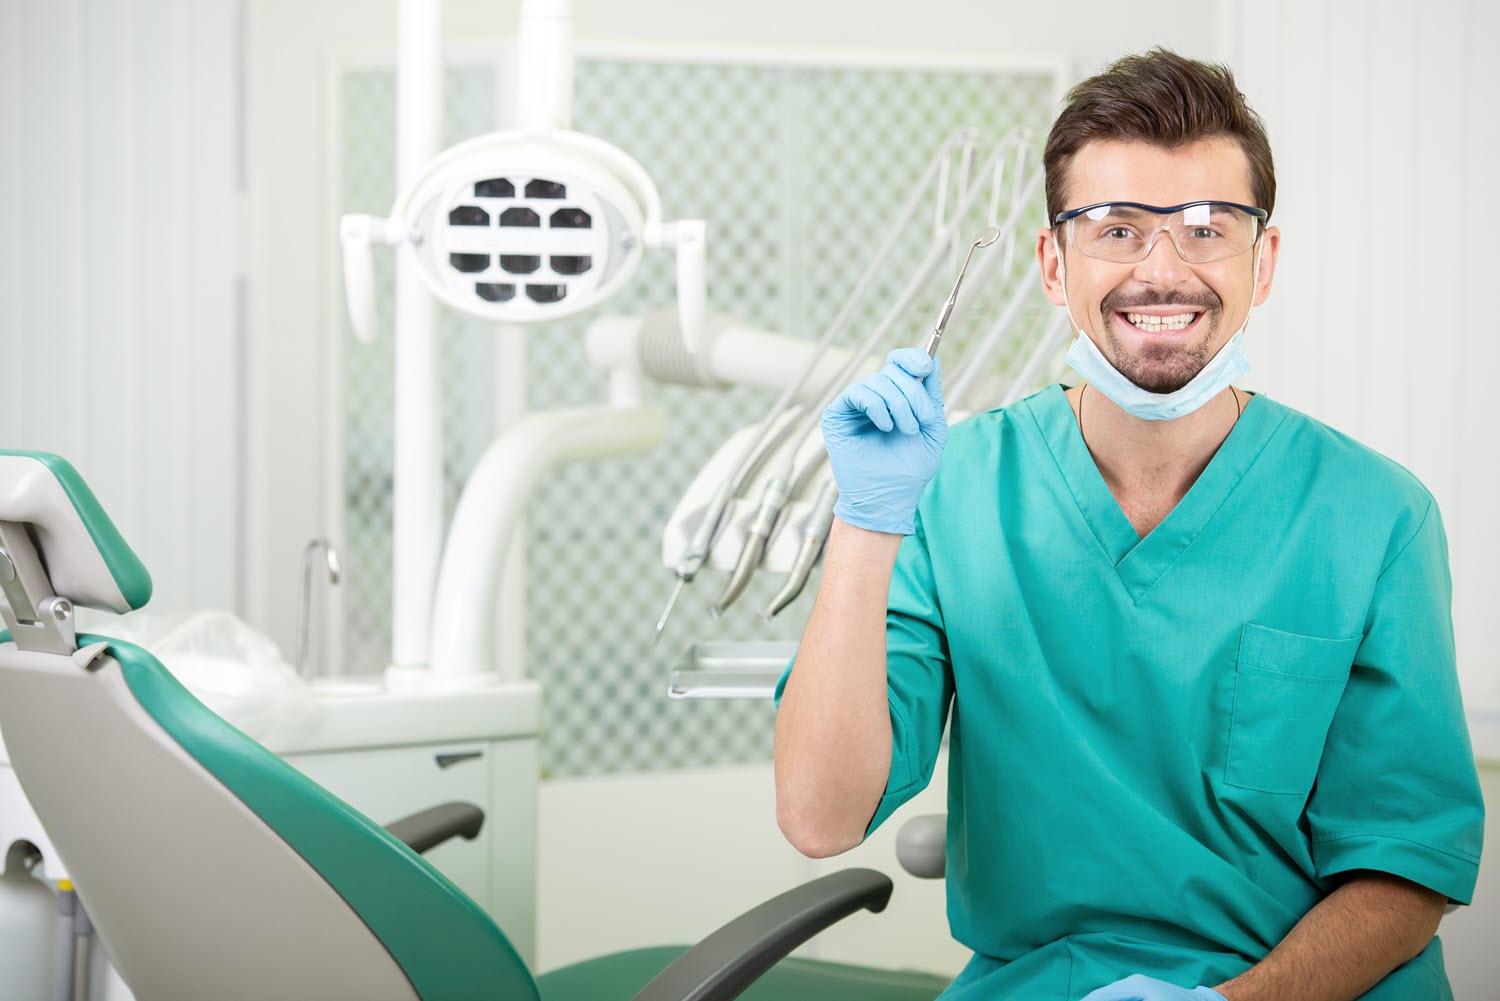 Dental Assistants Email Lists and Certified CDAs Mailing Databases for 2022